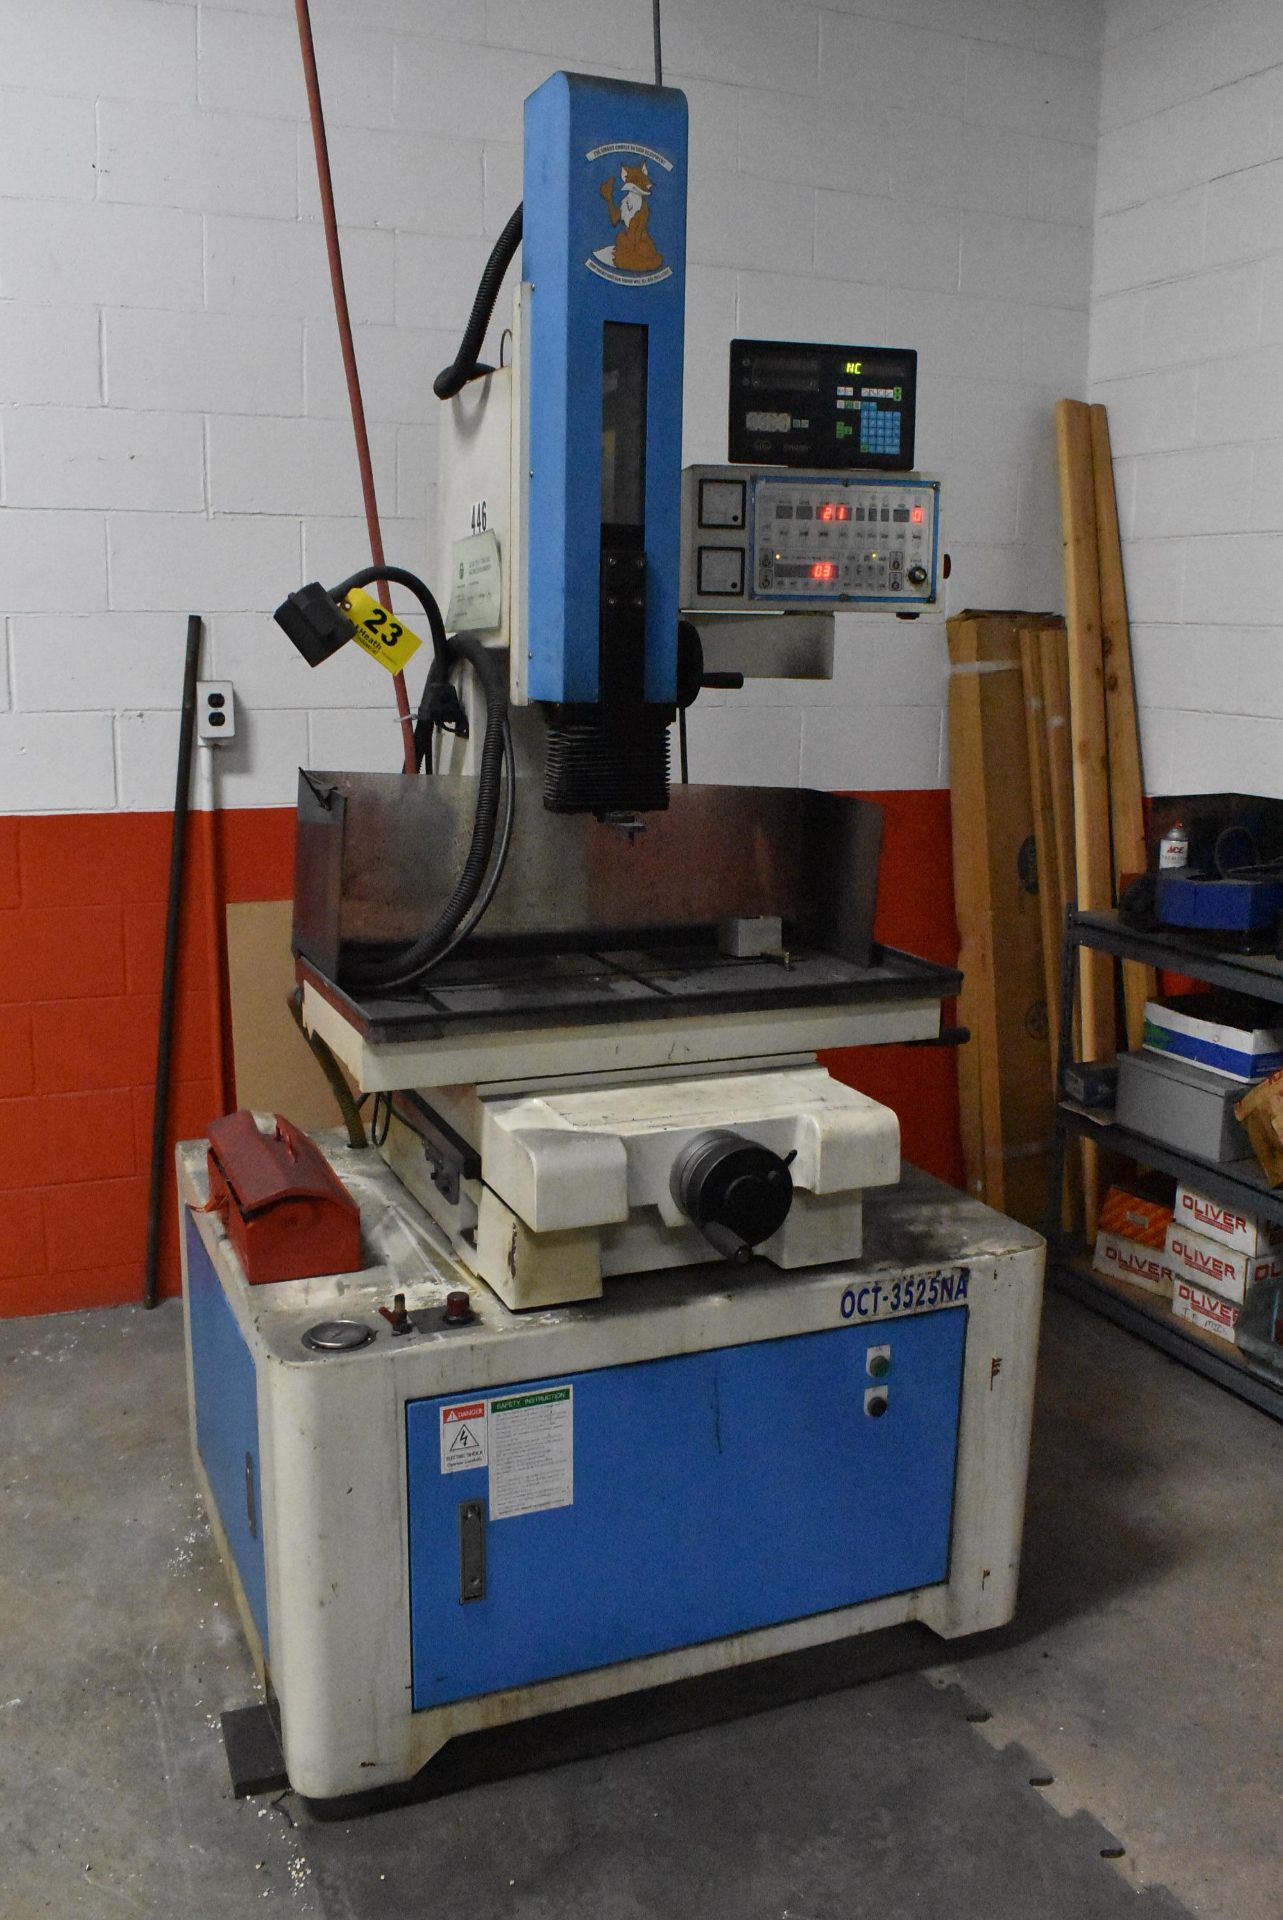 OCEAN TECHNOLOGIES MODEL OCT-3525NA EDM DRILL, S/N DR00360803 (2003), 600 MM X 300 MM TABLE, 350